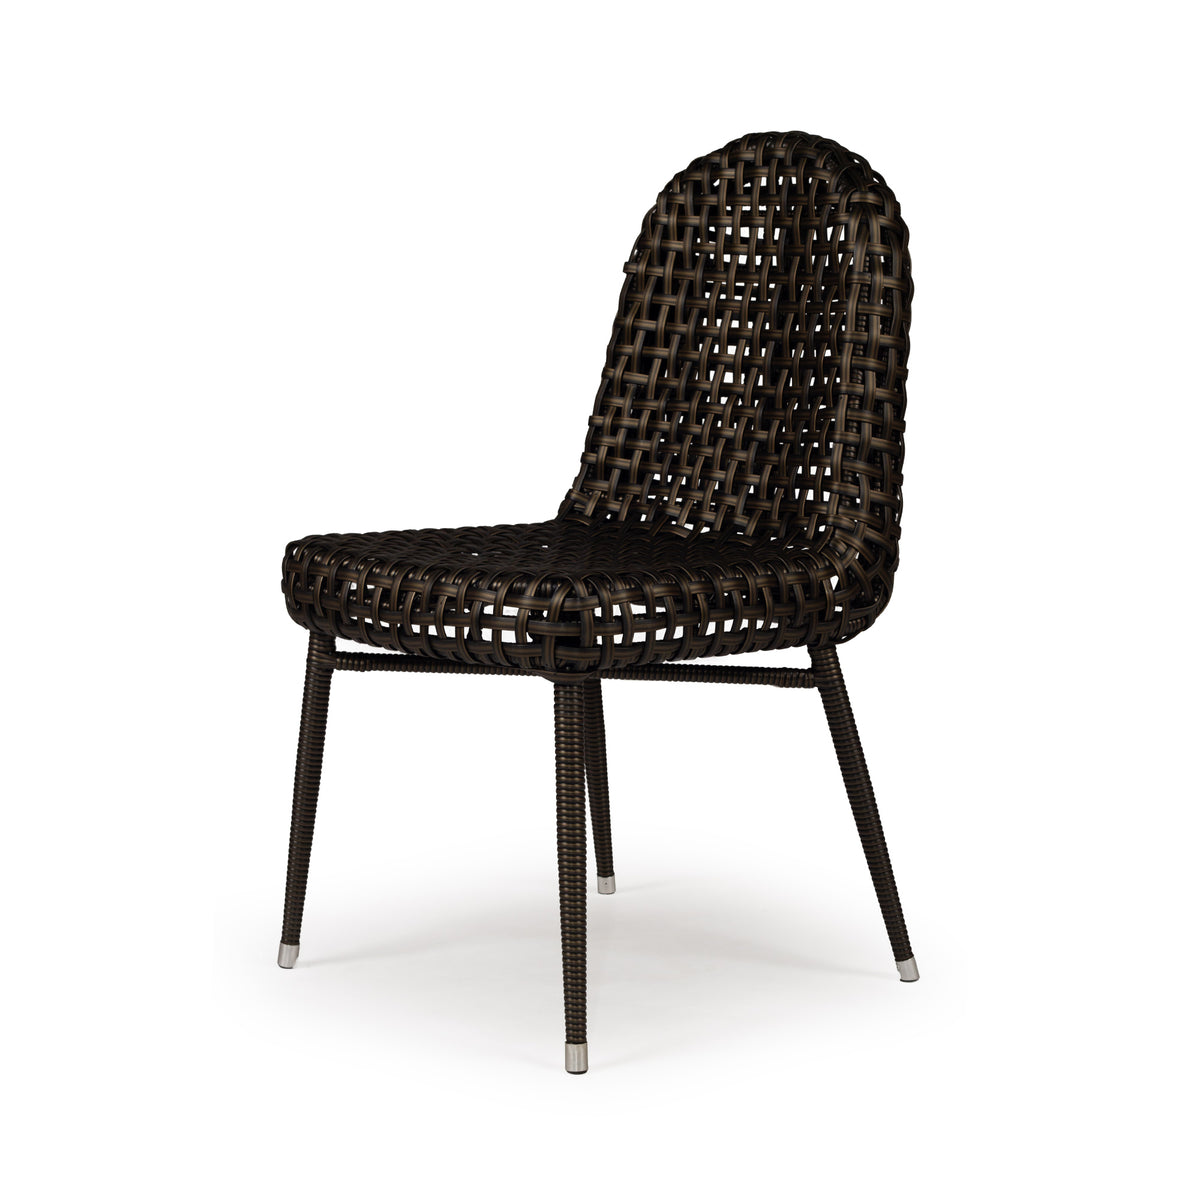 Remy Wicker Outdoor Dining Chair - Black